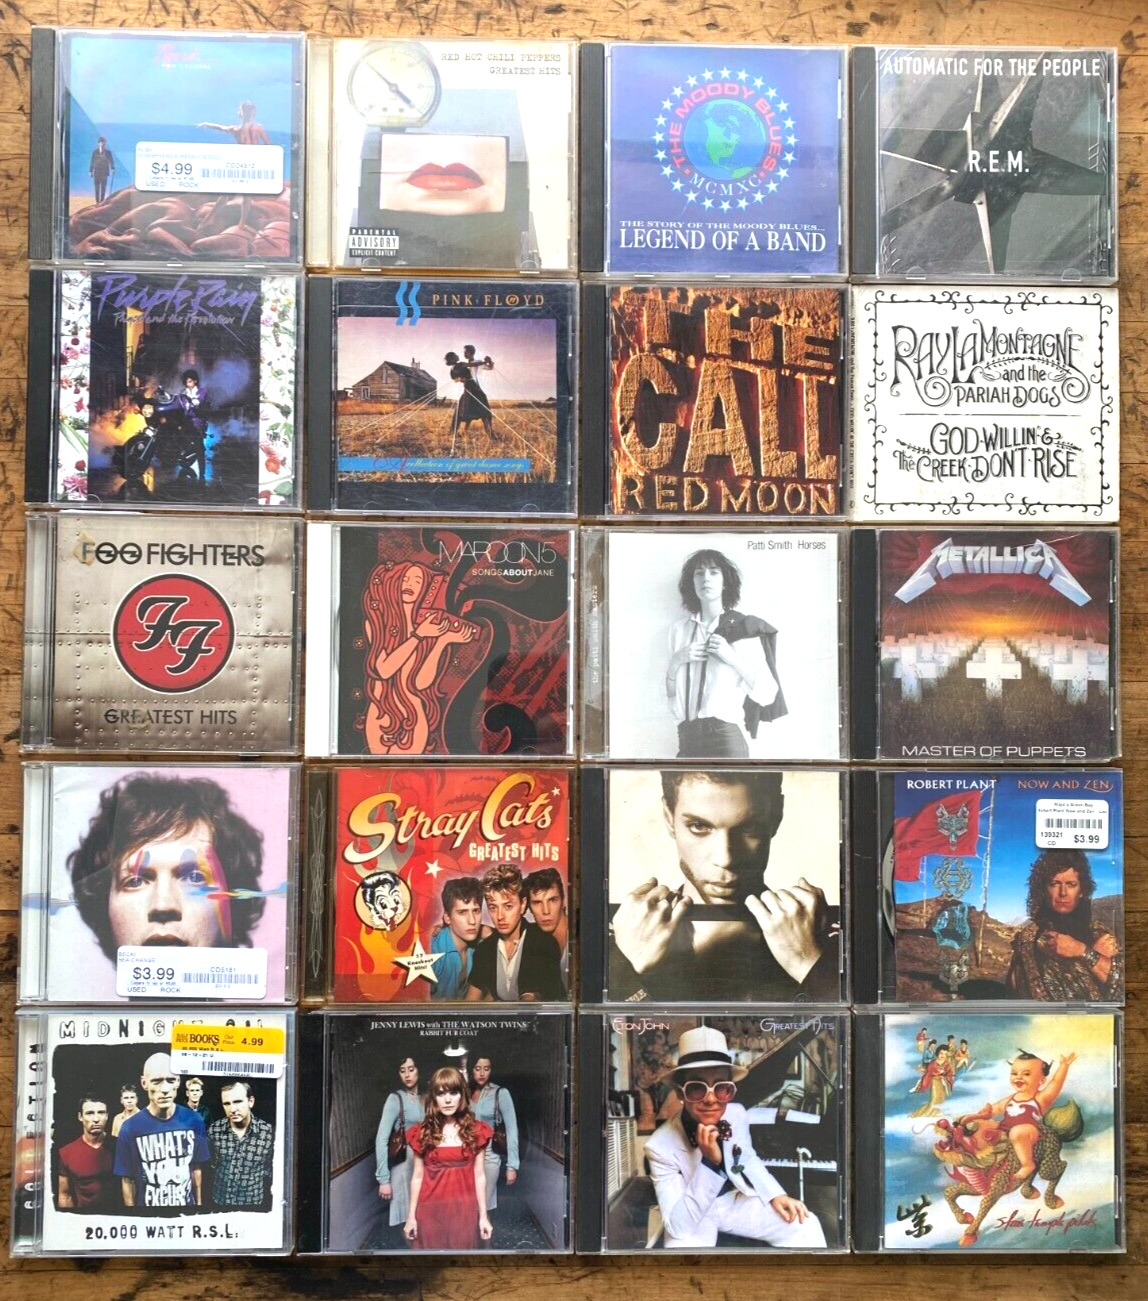 Make Your Own CD Bundle: Canned Heat, Metallica, Muse, W.A.S.P.